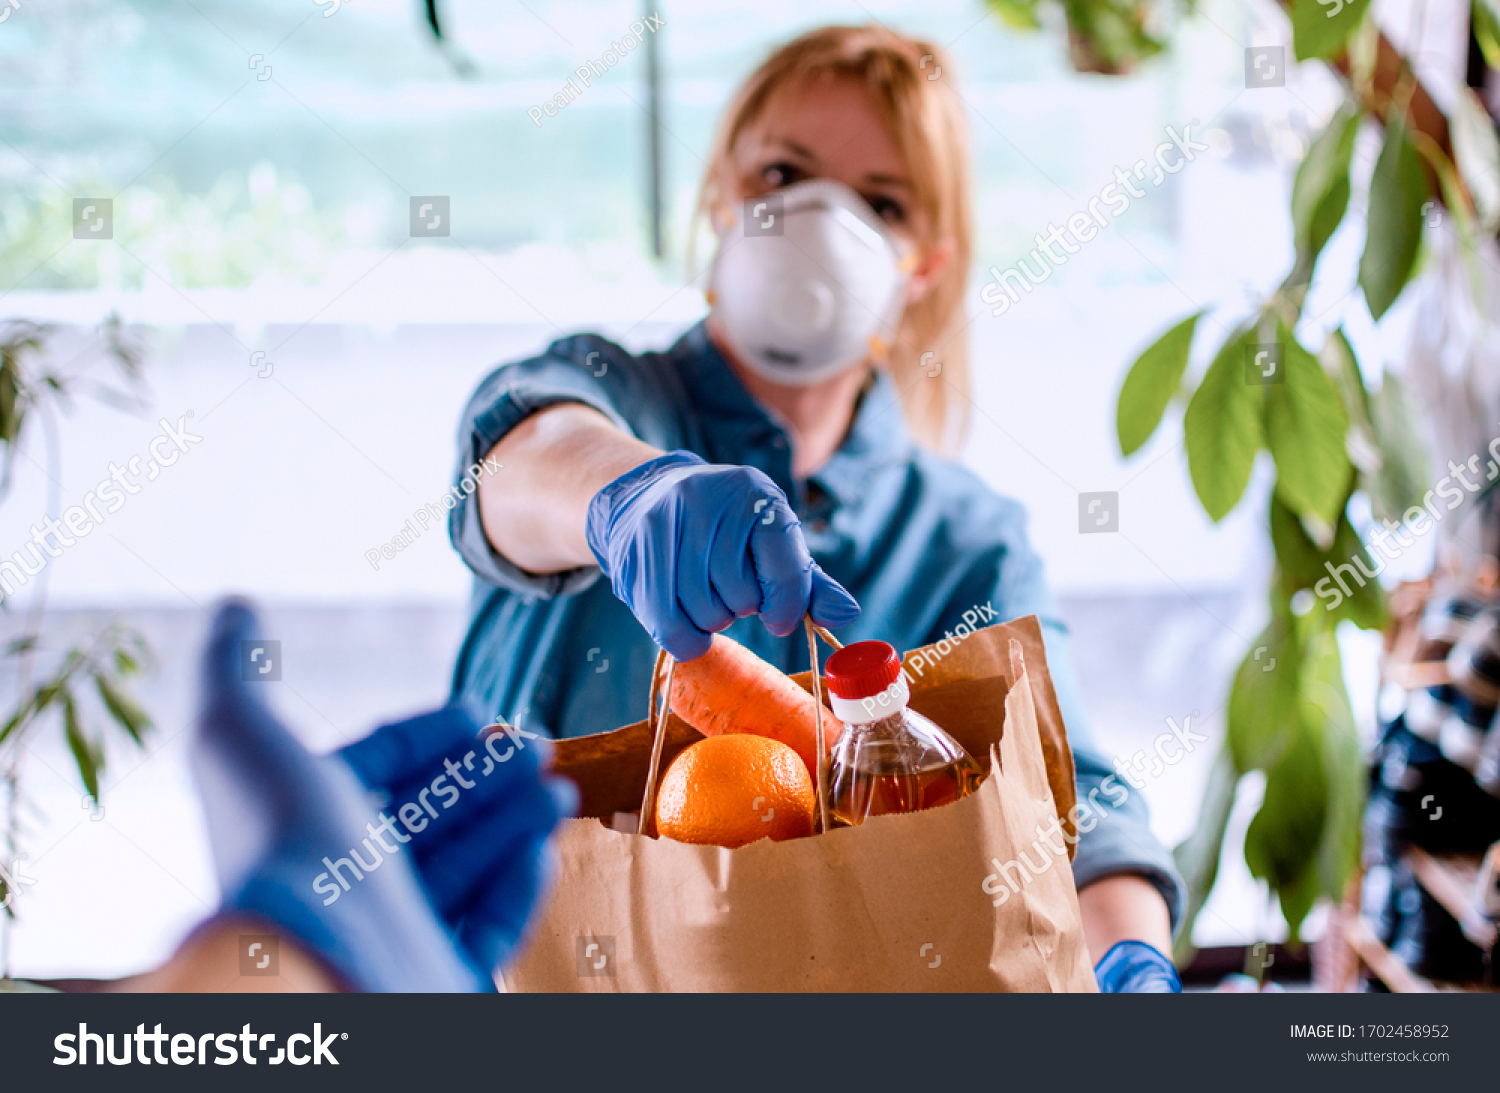 Woman delivering Food in paper bag during Covid 19 outbreak. Female  Volunteer holding groceries in the house porch. Delivery woman in face mask and gloves giving Donating neccessities to a hand #1702458952